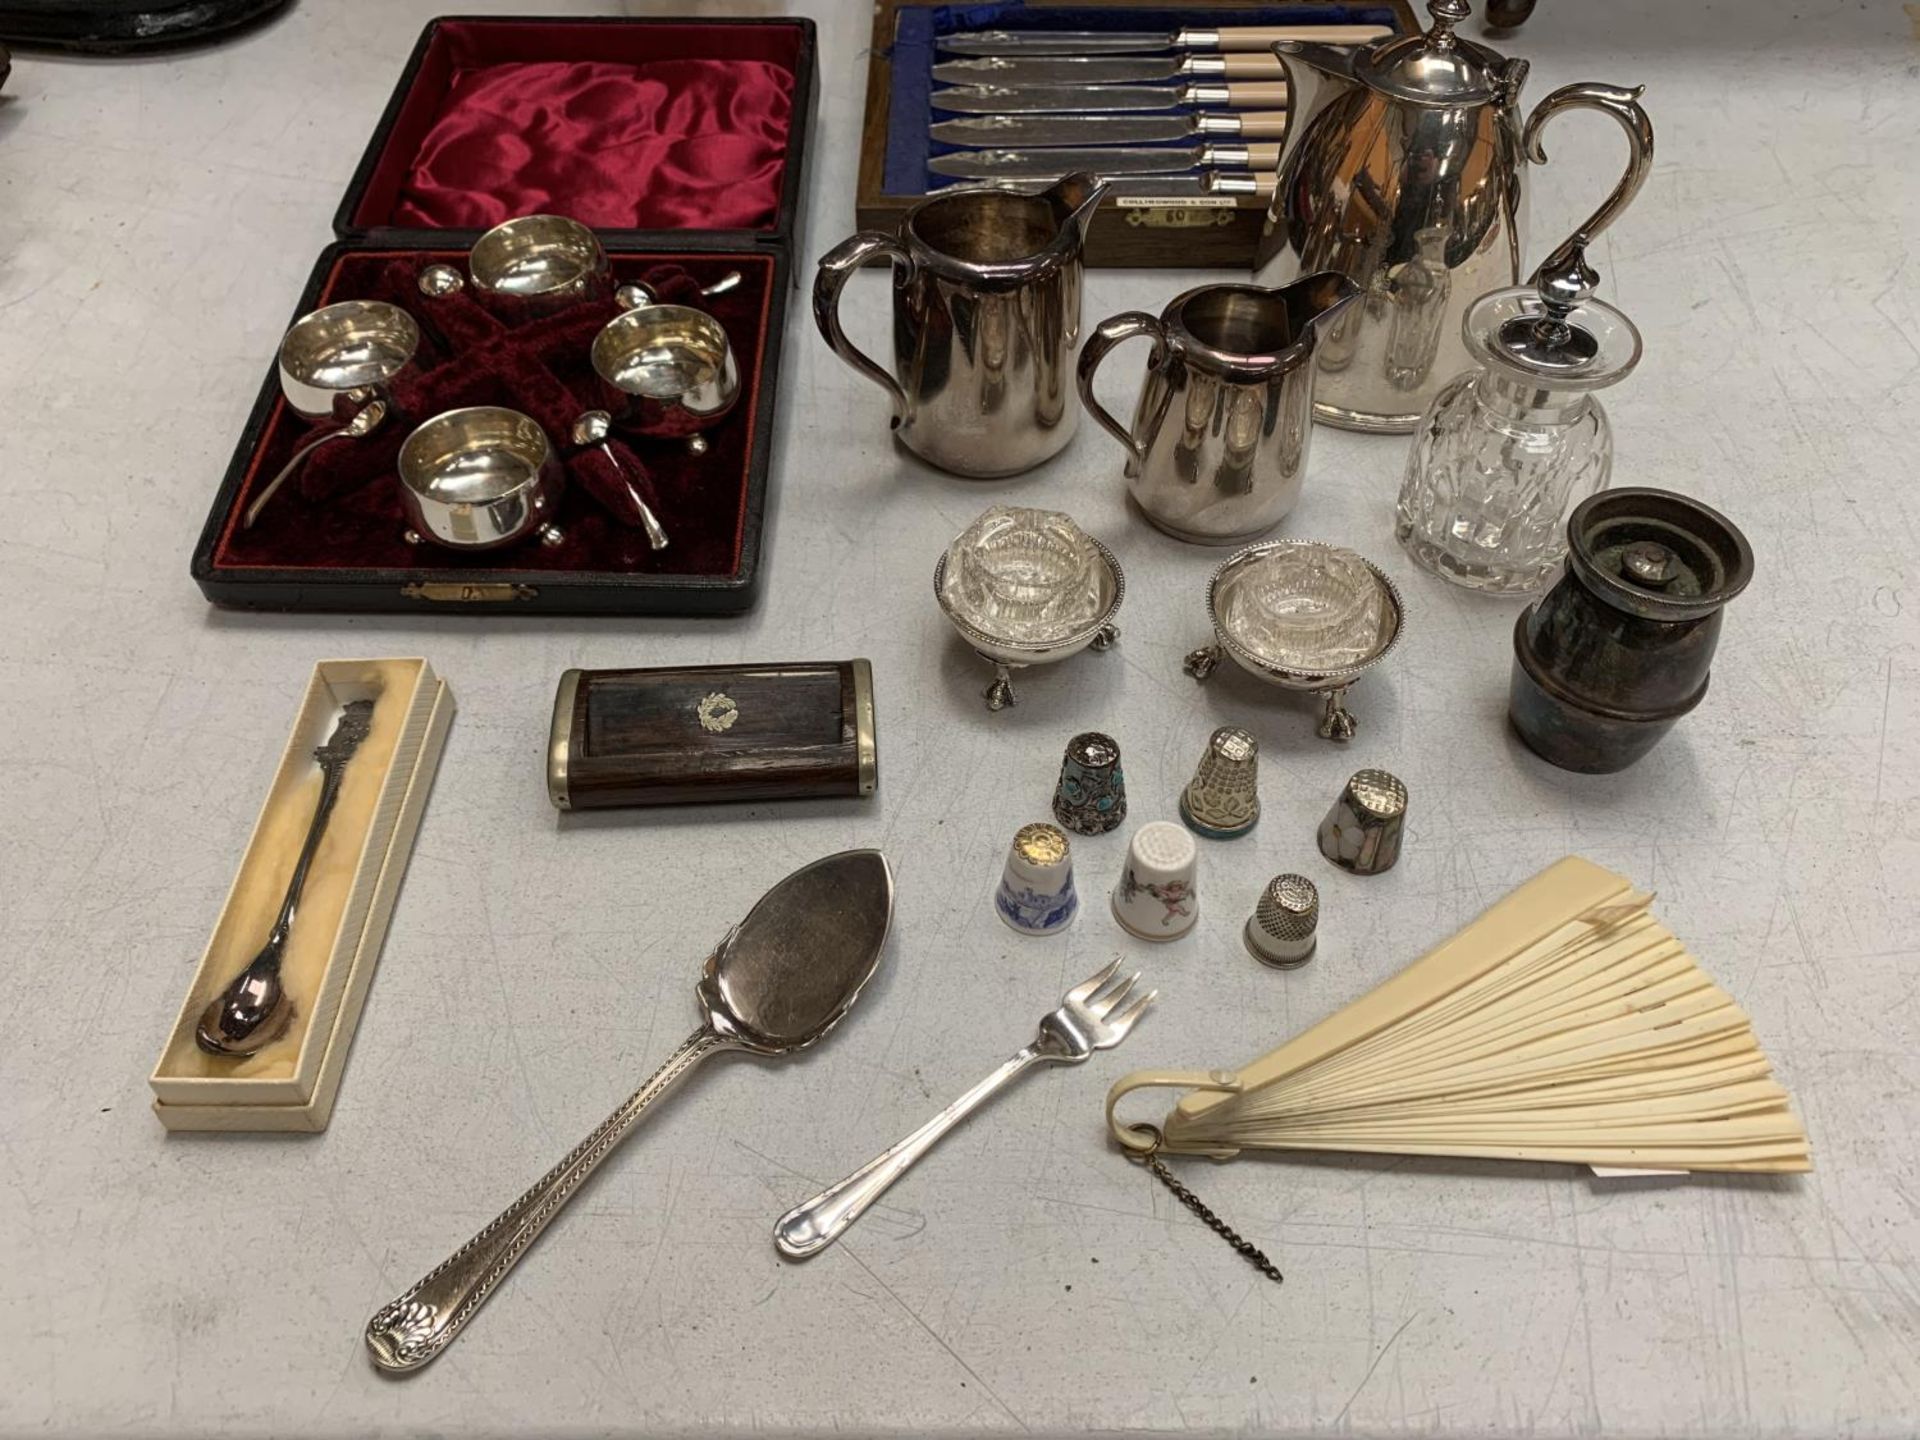 AN ASSORTMENT OF SILVER PLATE ITEMS: A BOXED CONDIMENT SET, JUGS, A PAIR OF SALTS, FISH KNIVES AND - Image 2 of 4